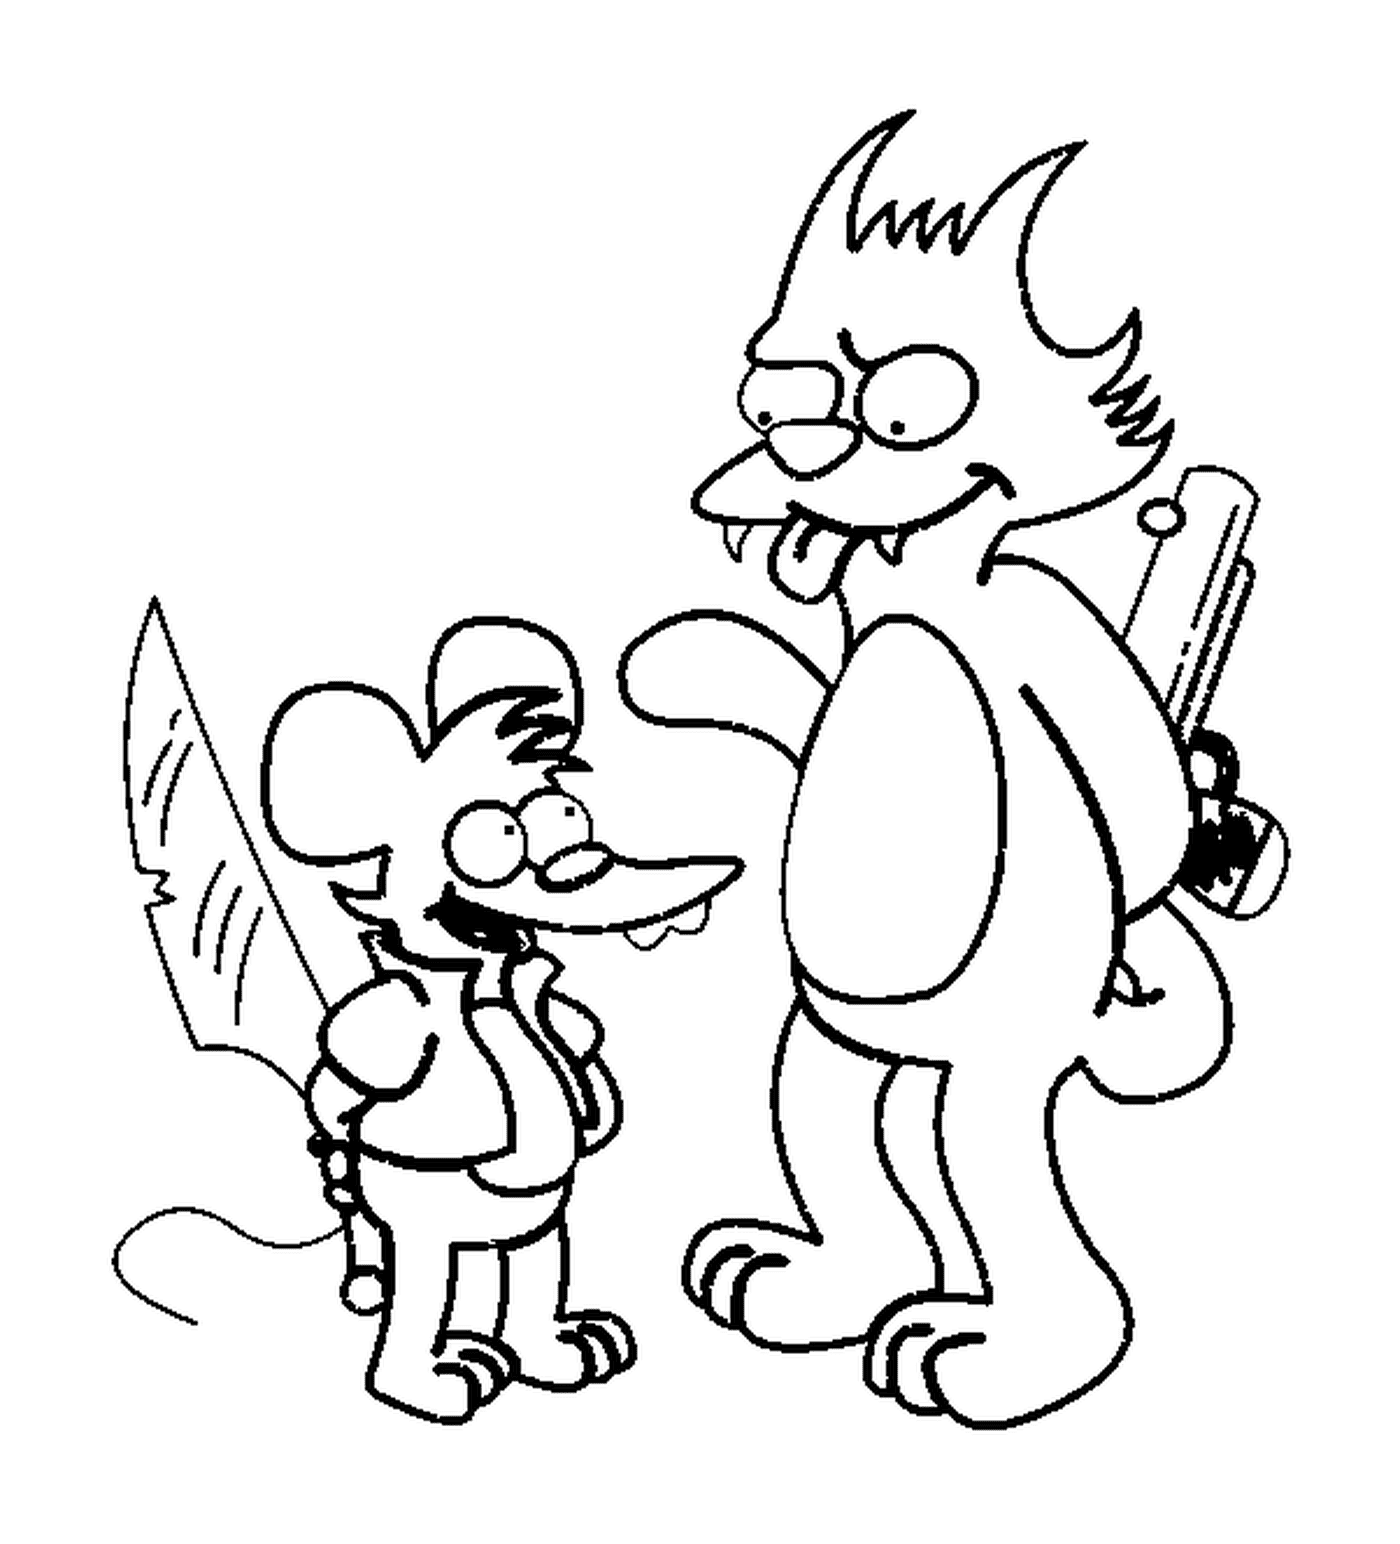  Itchy and Scratchy Simpson 